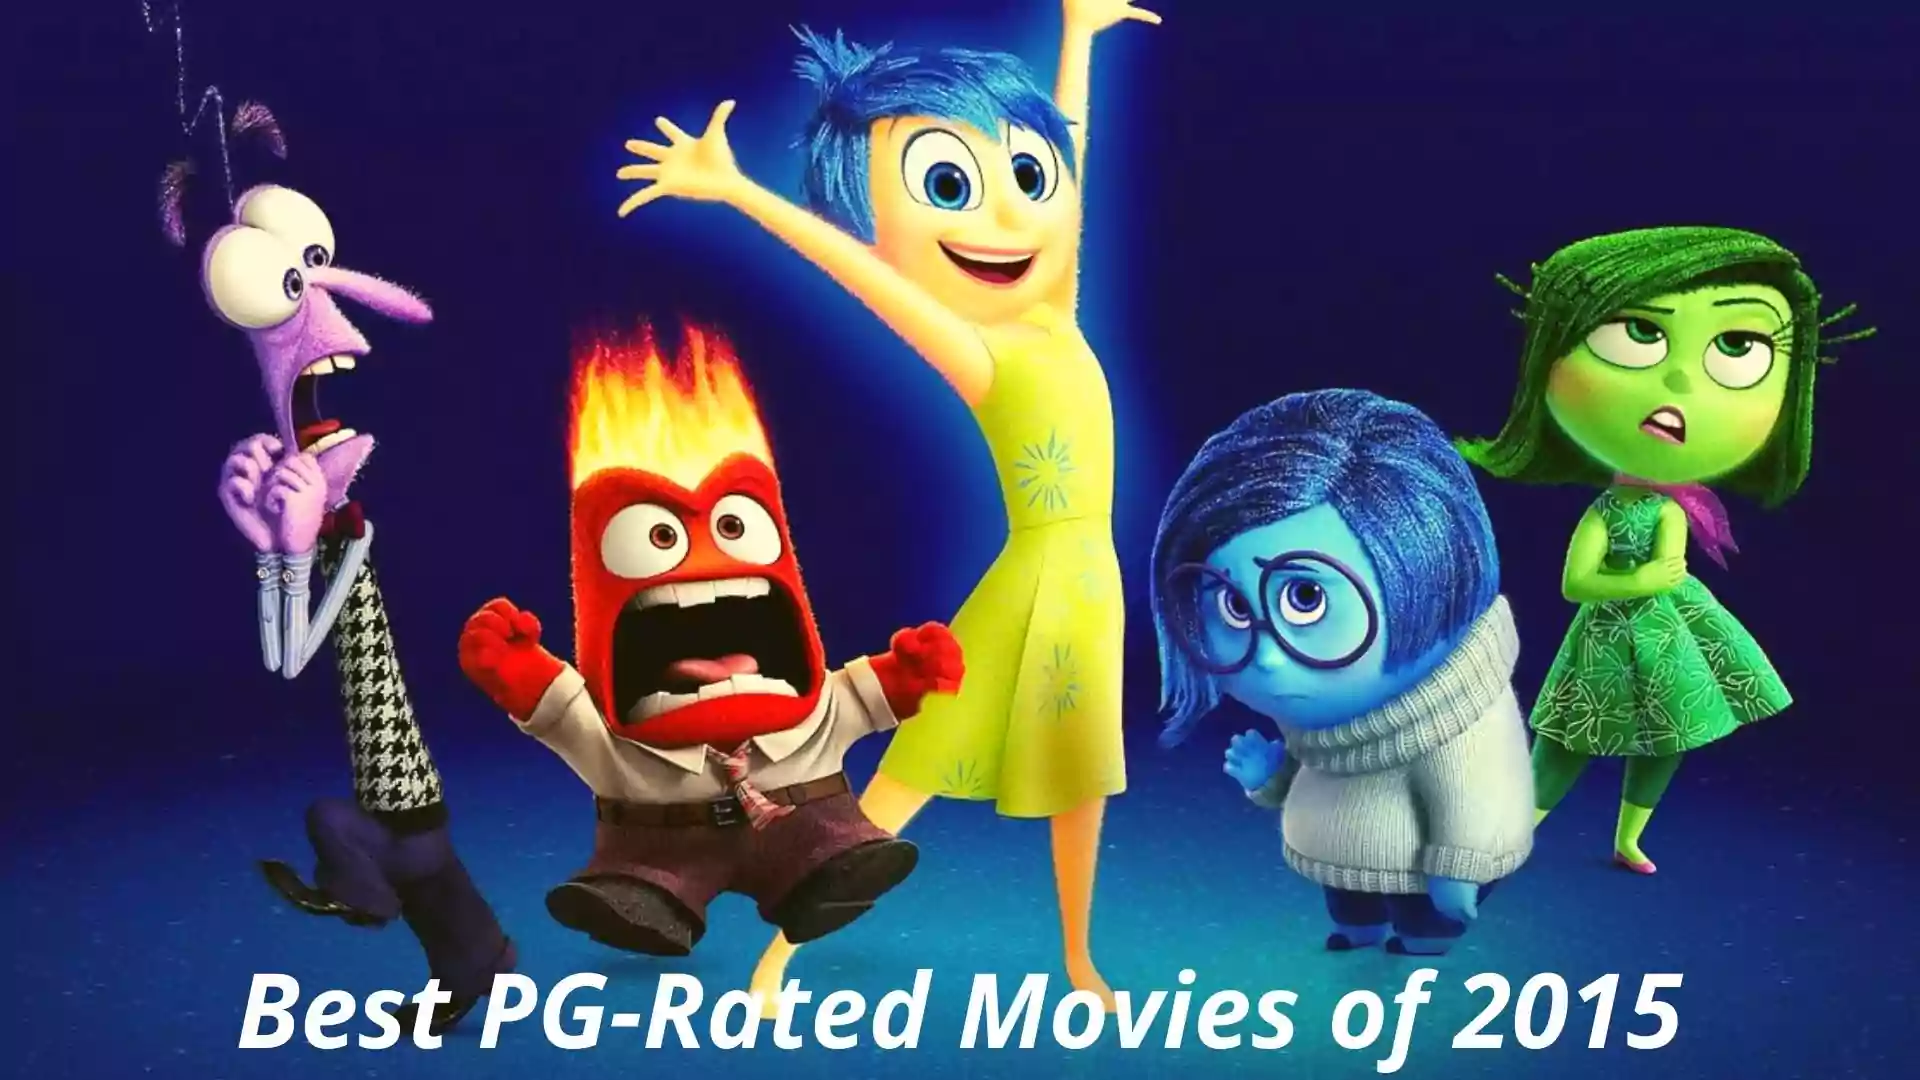 Best PG-Rated Movies of 2015